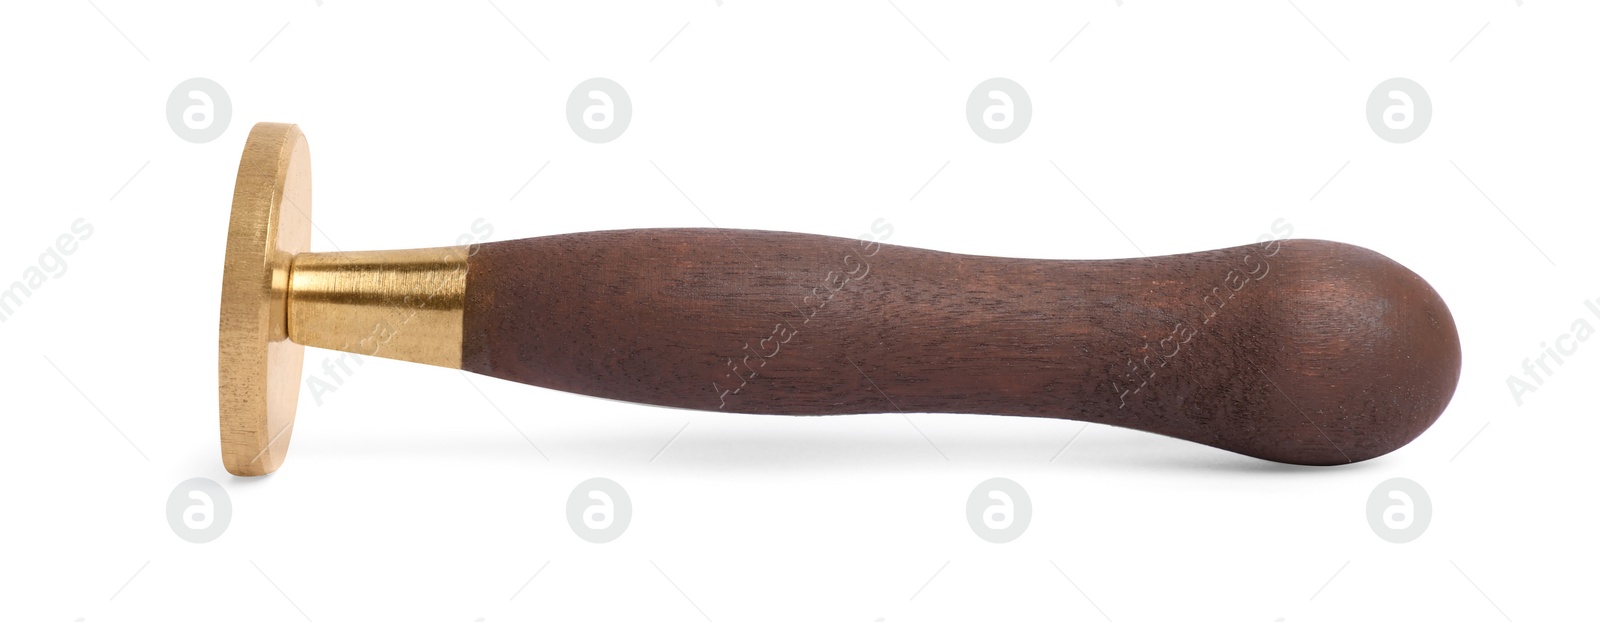 Photo of One stamp tool with wooden handle isolated on white